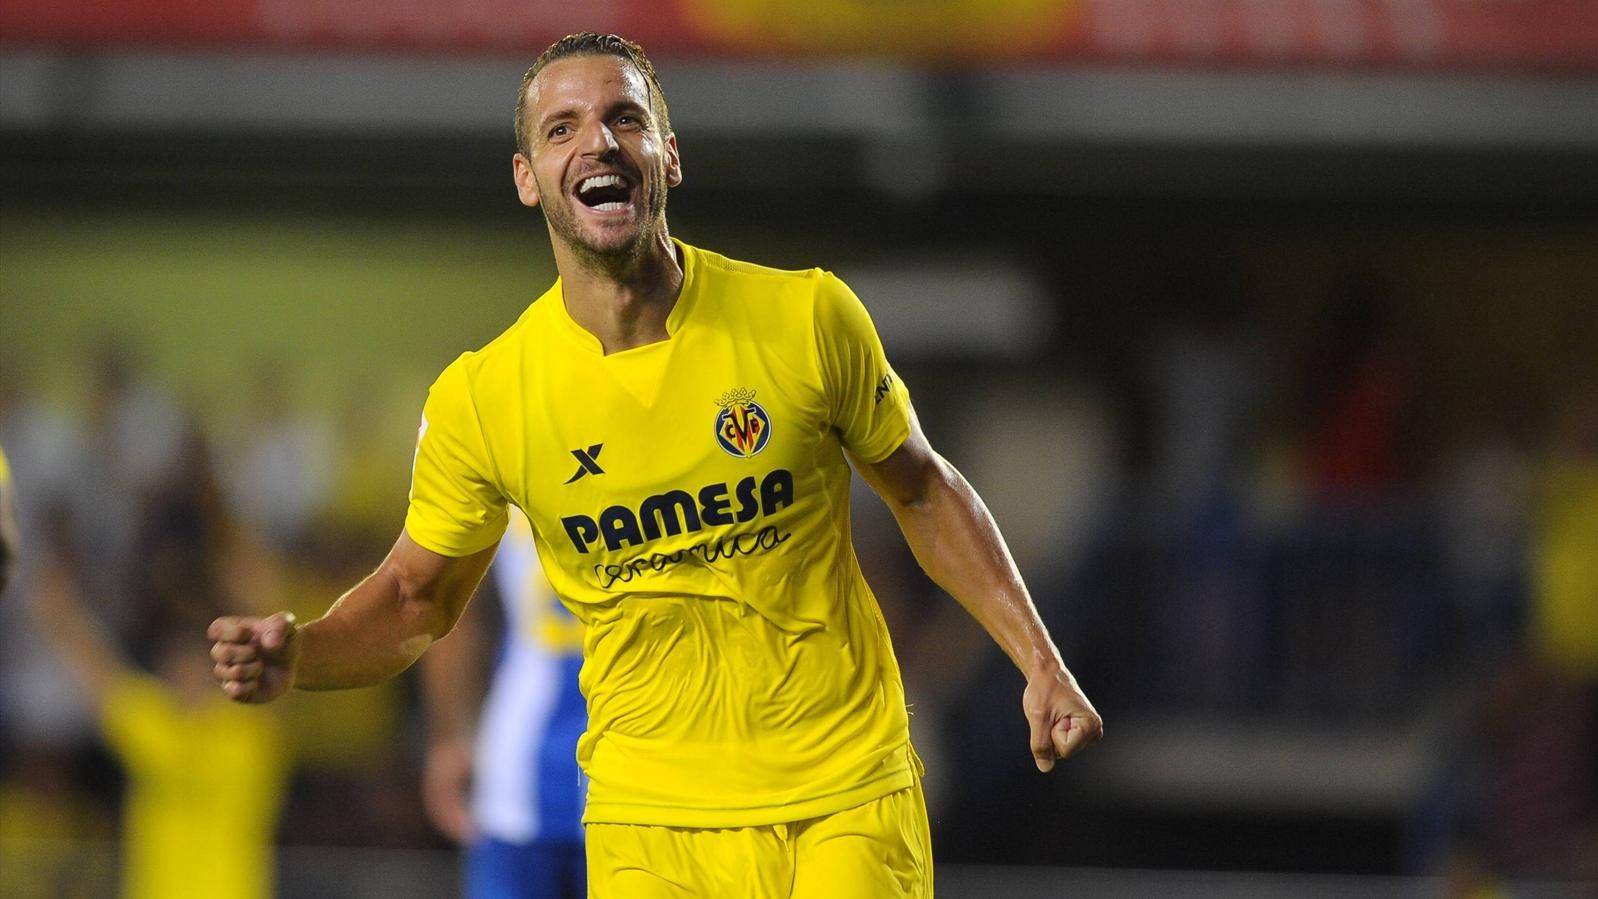 Soldier, celebrating a goal this season with the Villarreal